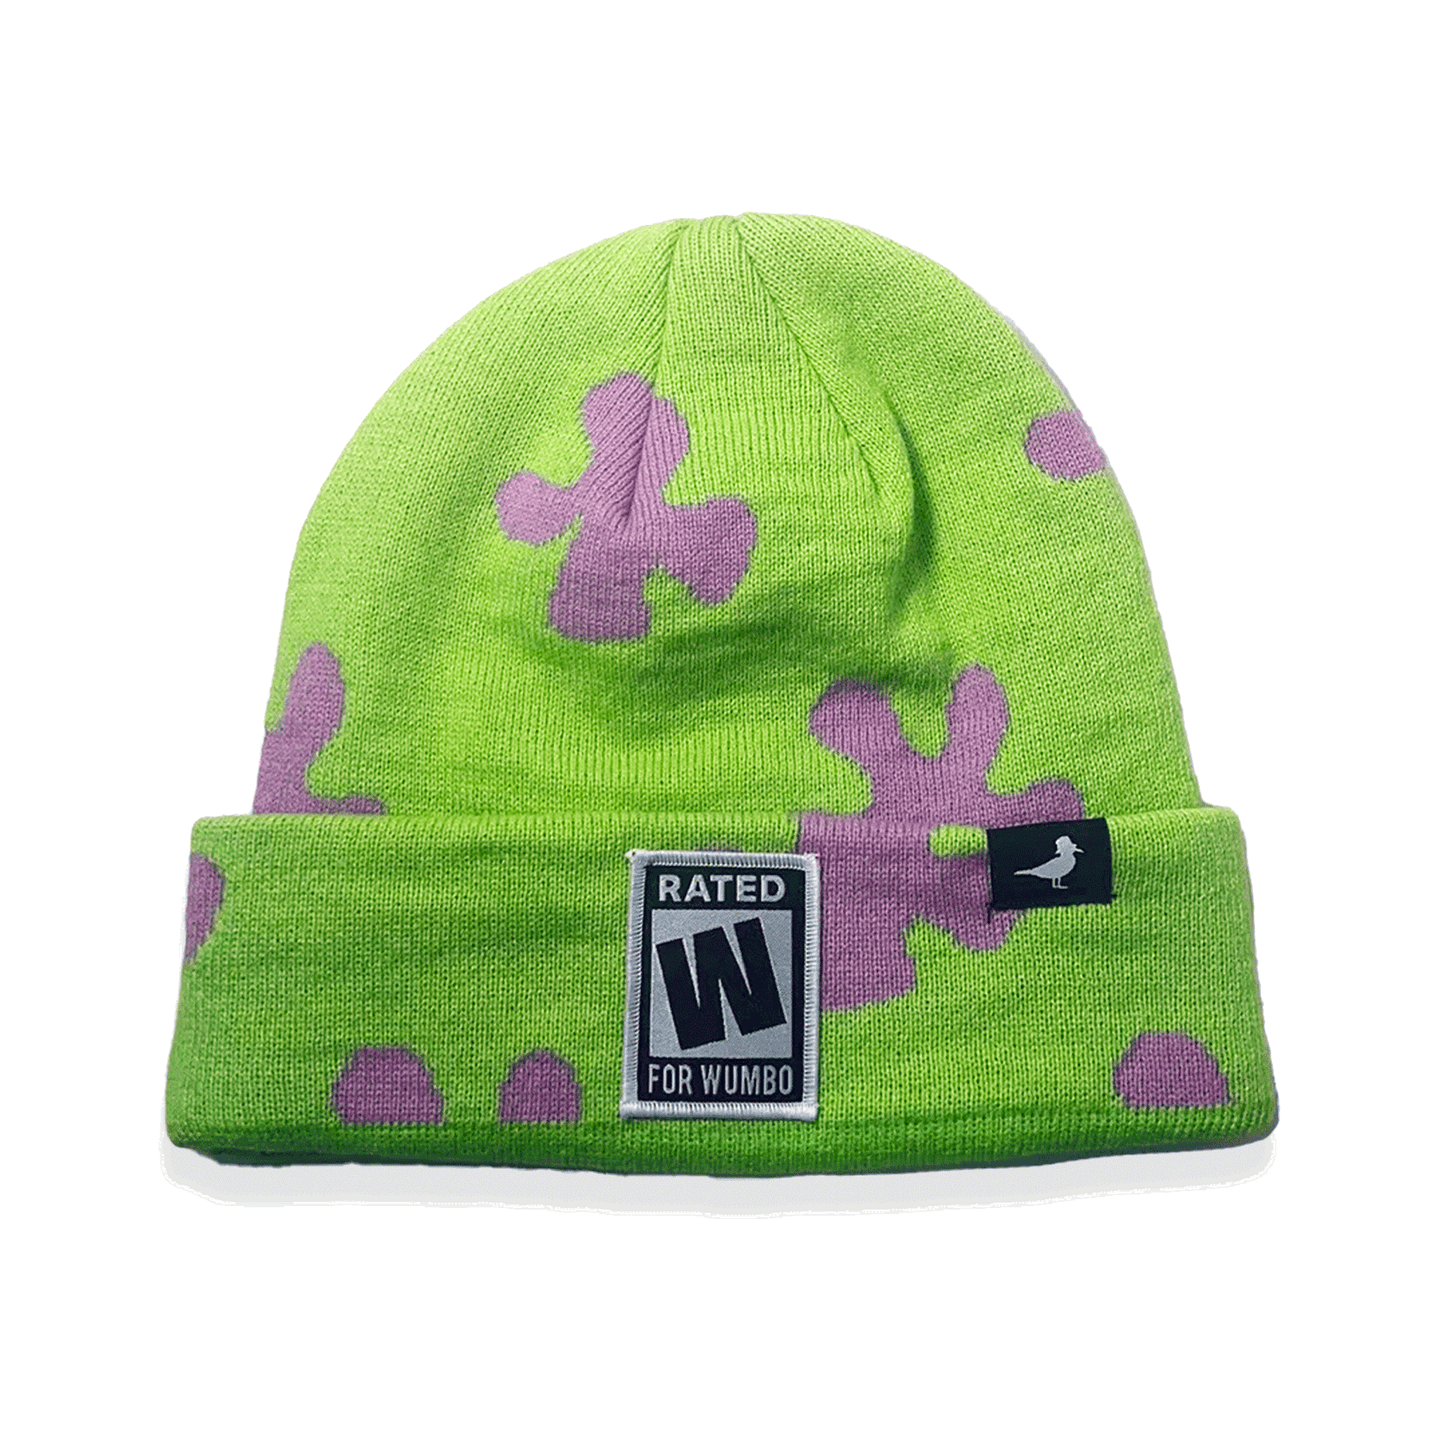 Rated W for Wumbo Cuffed Knit Beanie